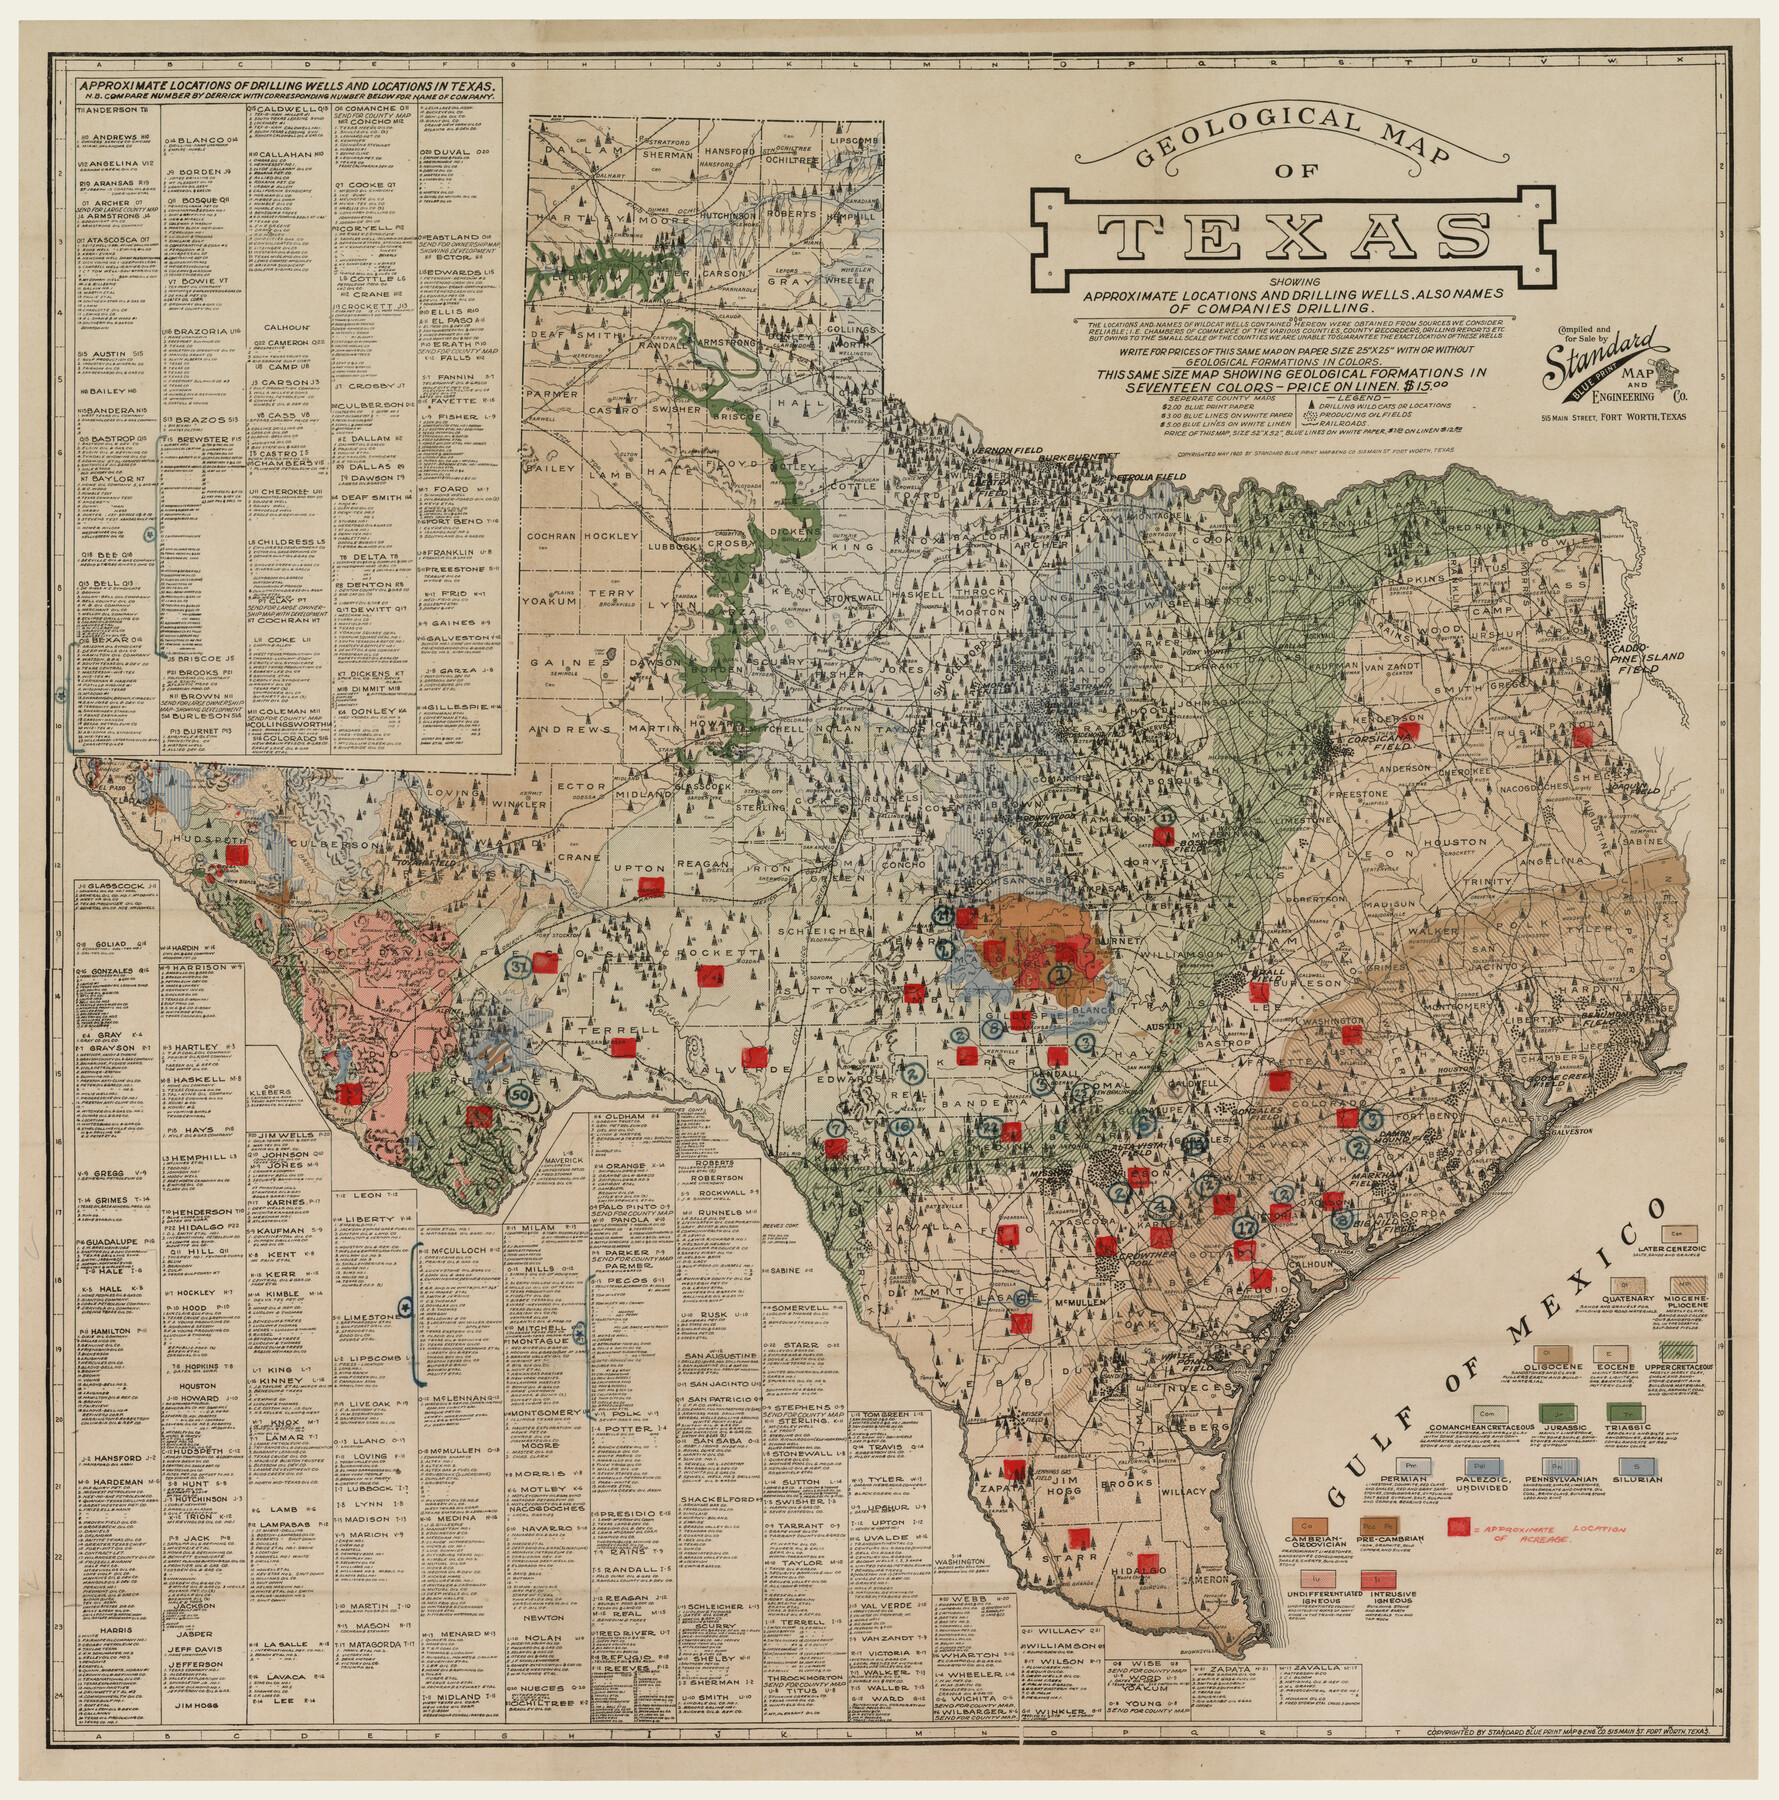 Geological map of Texas showing approximate locations and drilling